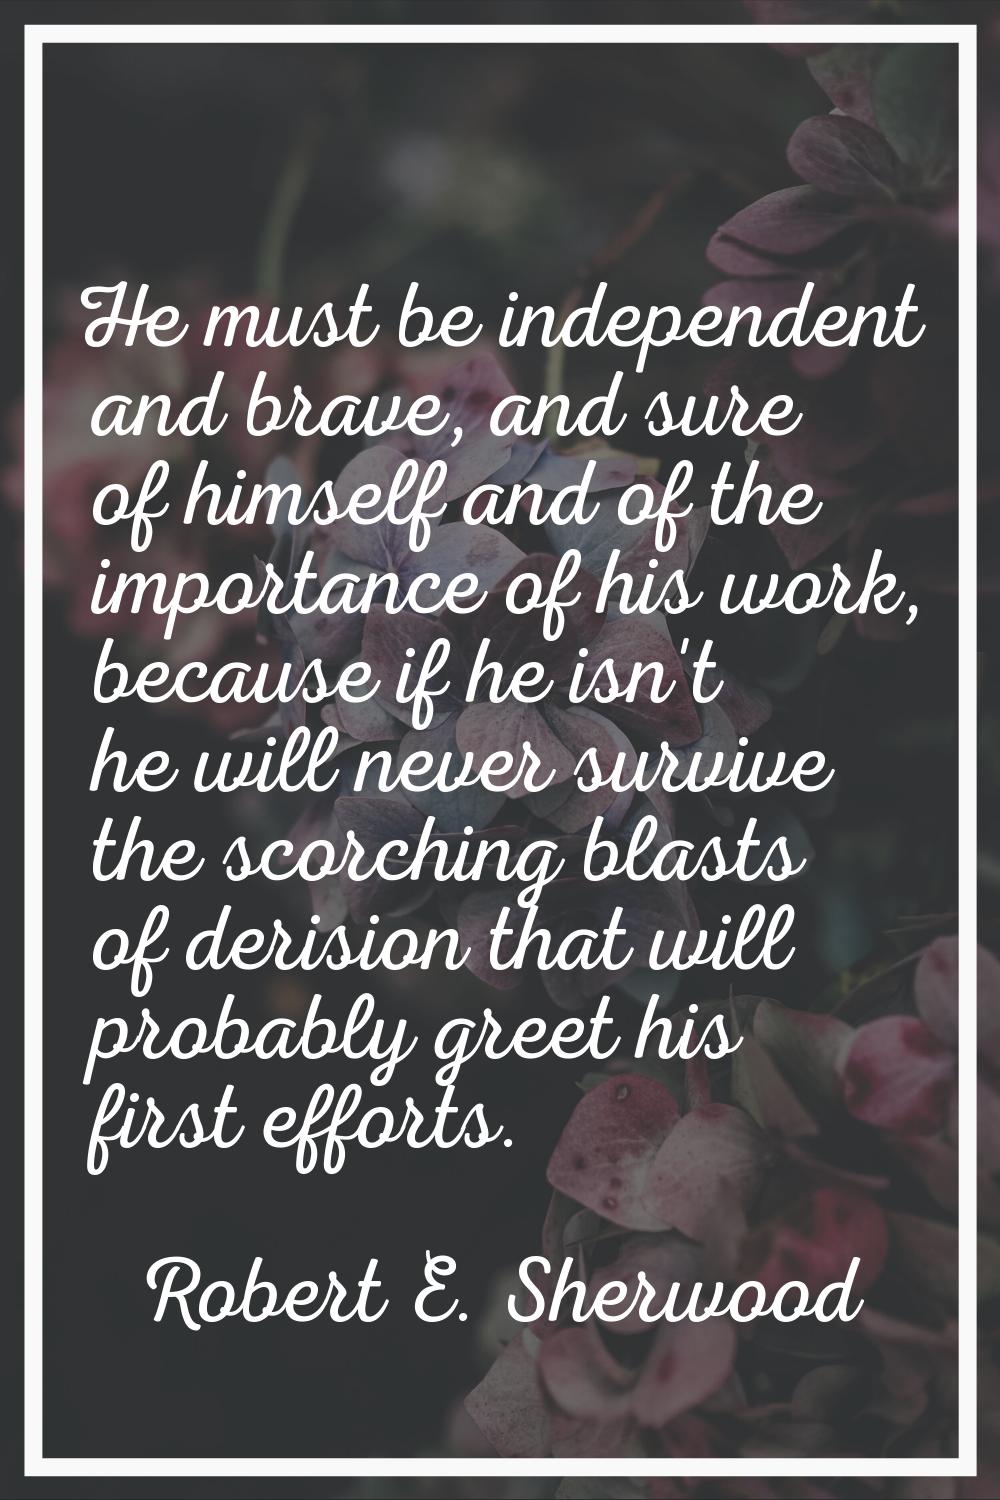 He must be independent and brave, and sure of himself and of the importance of his work, because if